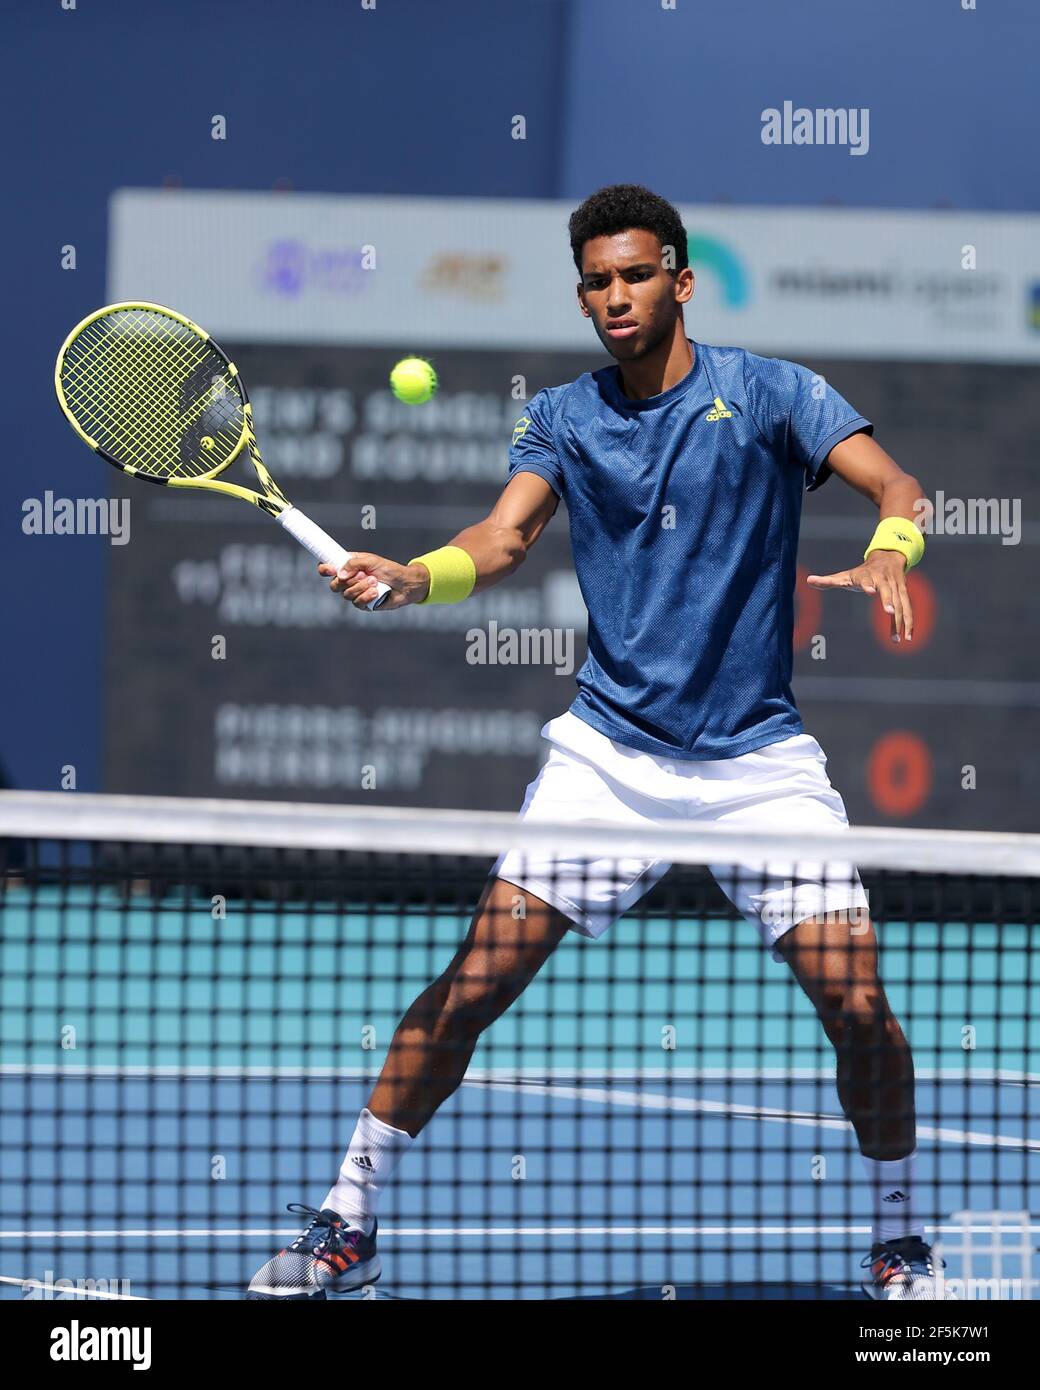 MIAMI GARDENS, FLORIDA - MARCH 26: Felix Auger-Aliassime practices prior to  his match on Day 5 of the 2021 Miami Open on March 26, 2021 in Miami  Gardens, Florida People: Felix Auger-Aliassime